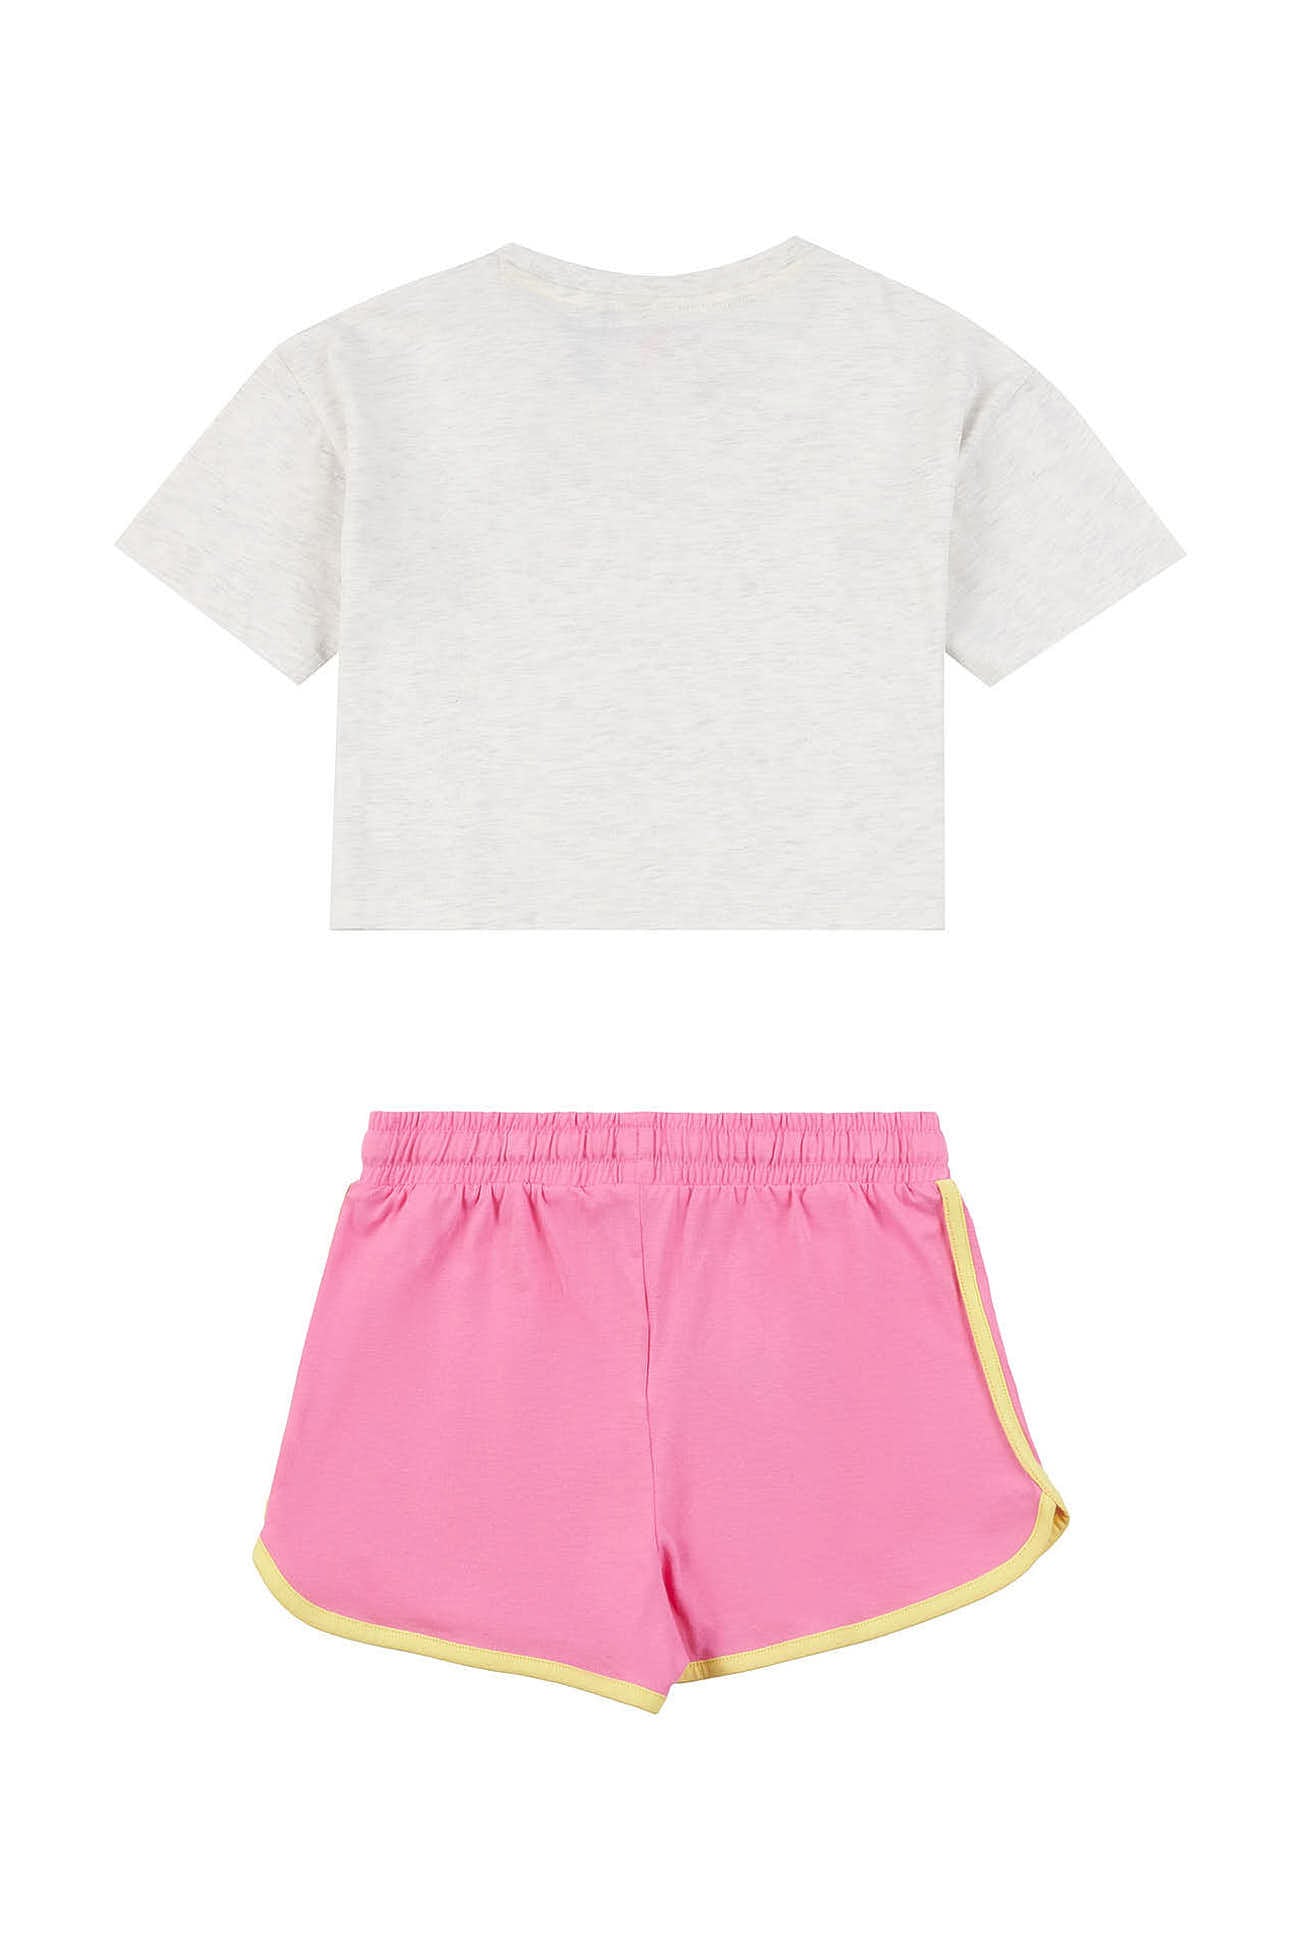 Girls Tee And Short Lounge Set in Morning Glory